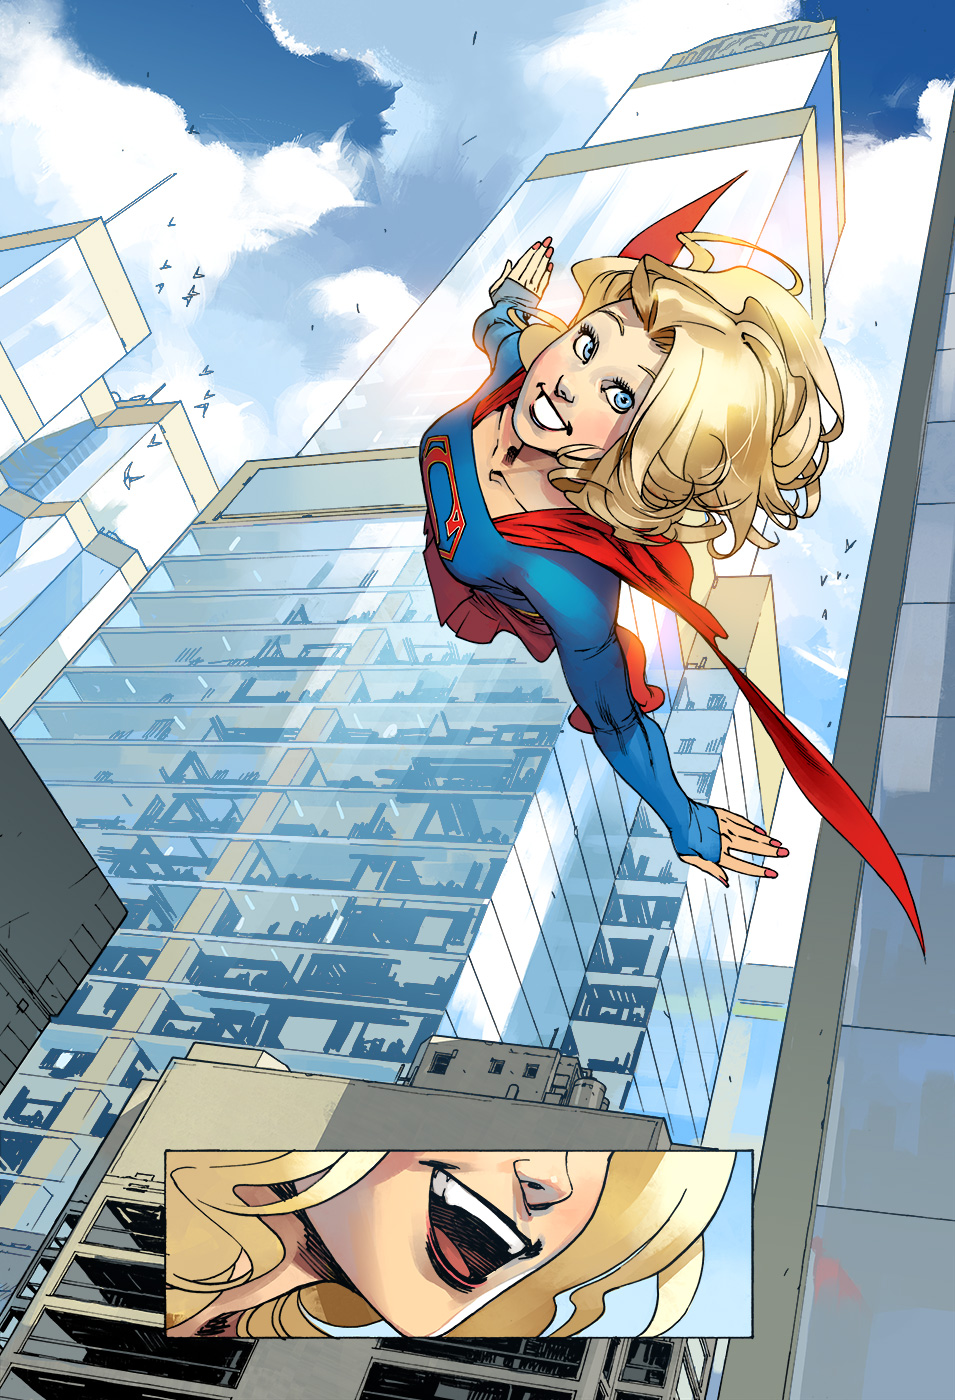 Geek insider, geekinsider, geekinsider. Com,, supergirl: comics for people who love the show, entertainment